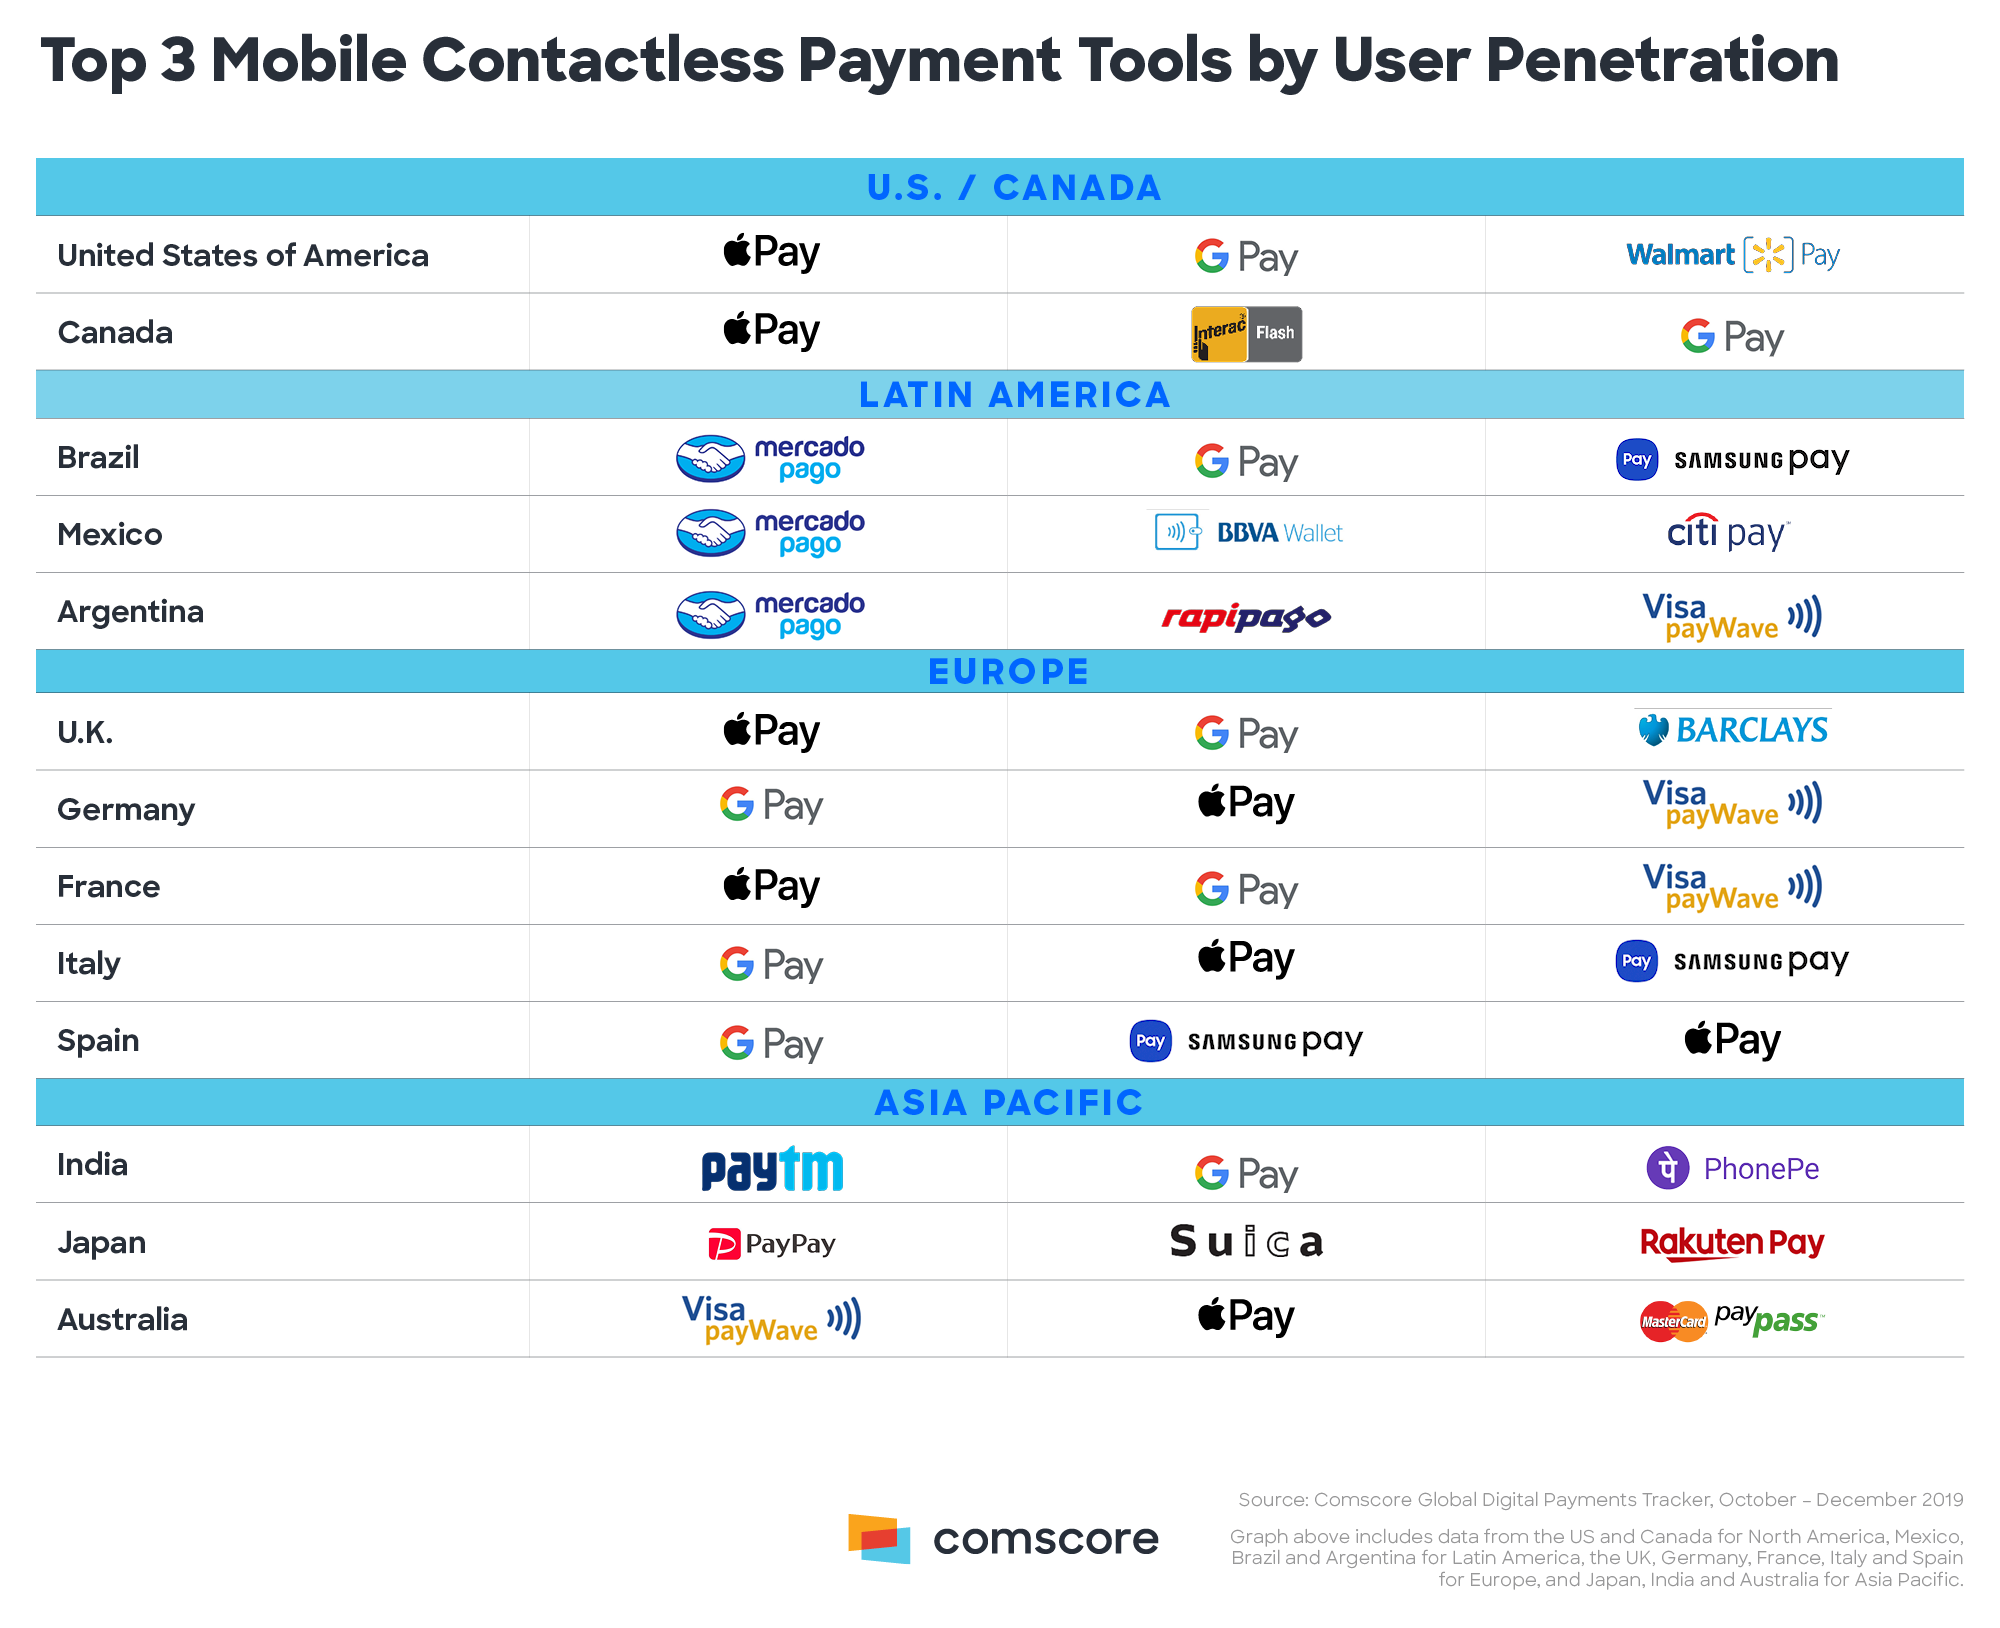 Top 3 Mobile Contactless Payment Tools by User Penetration